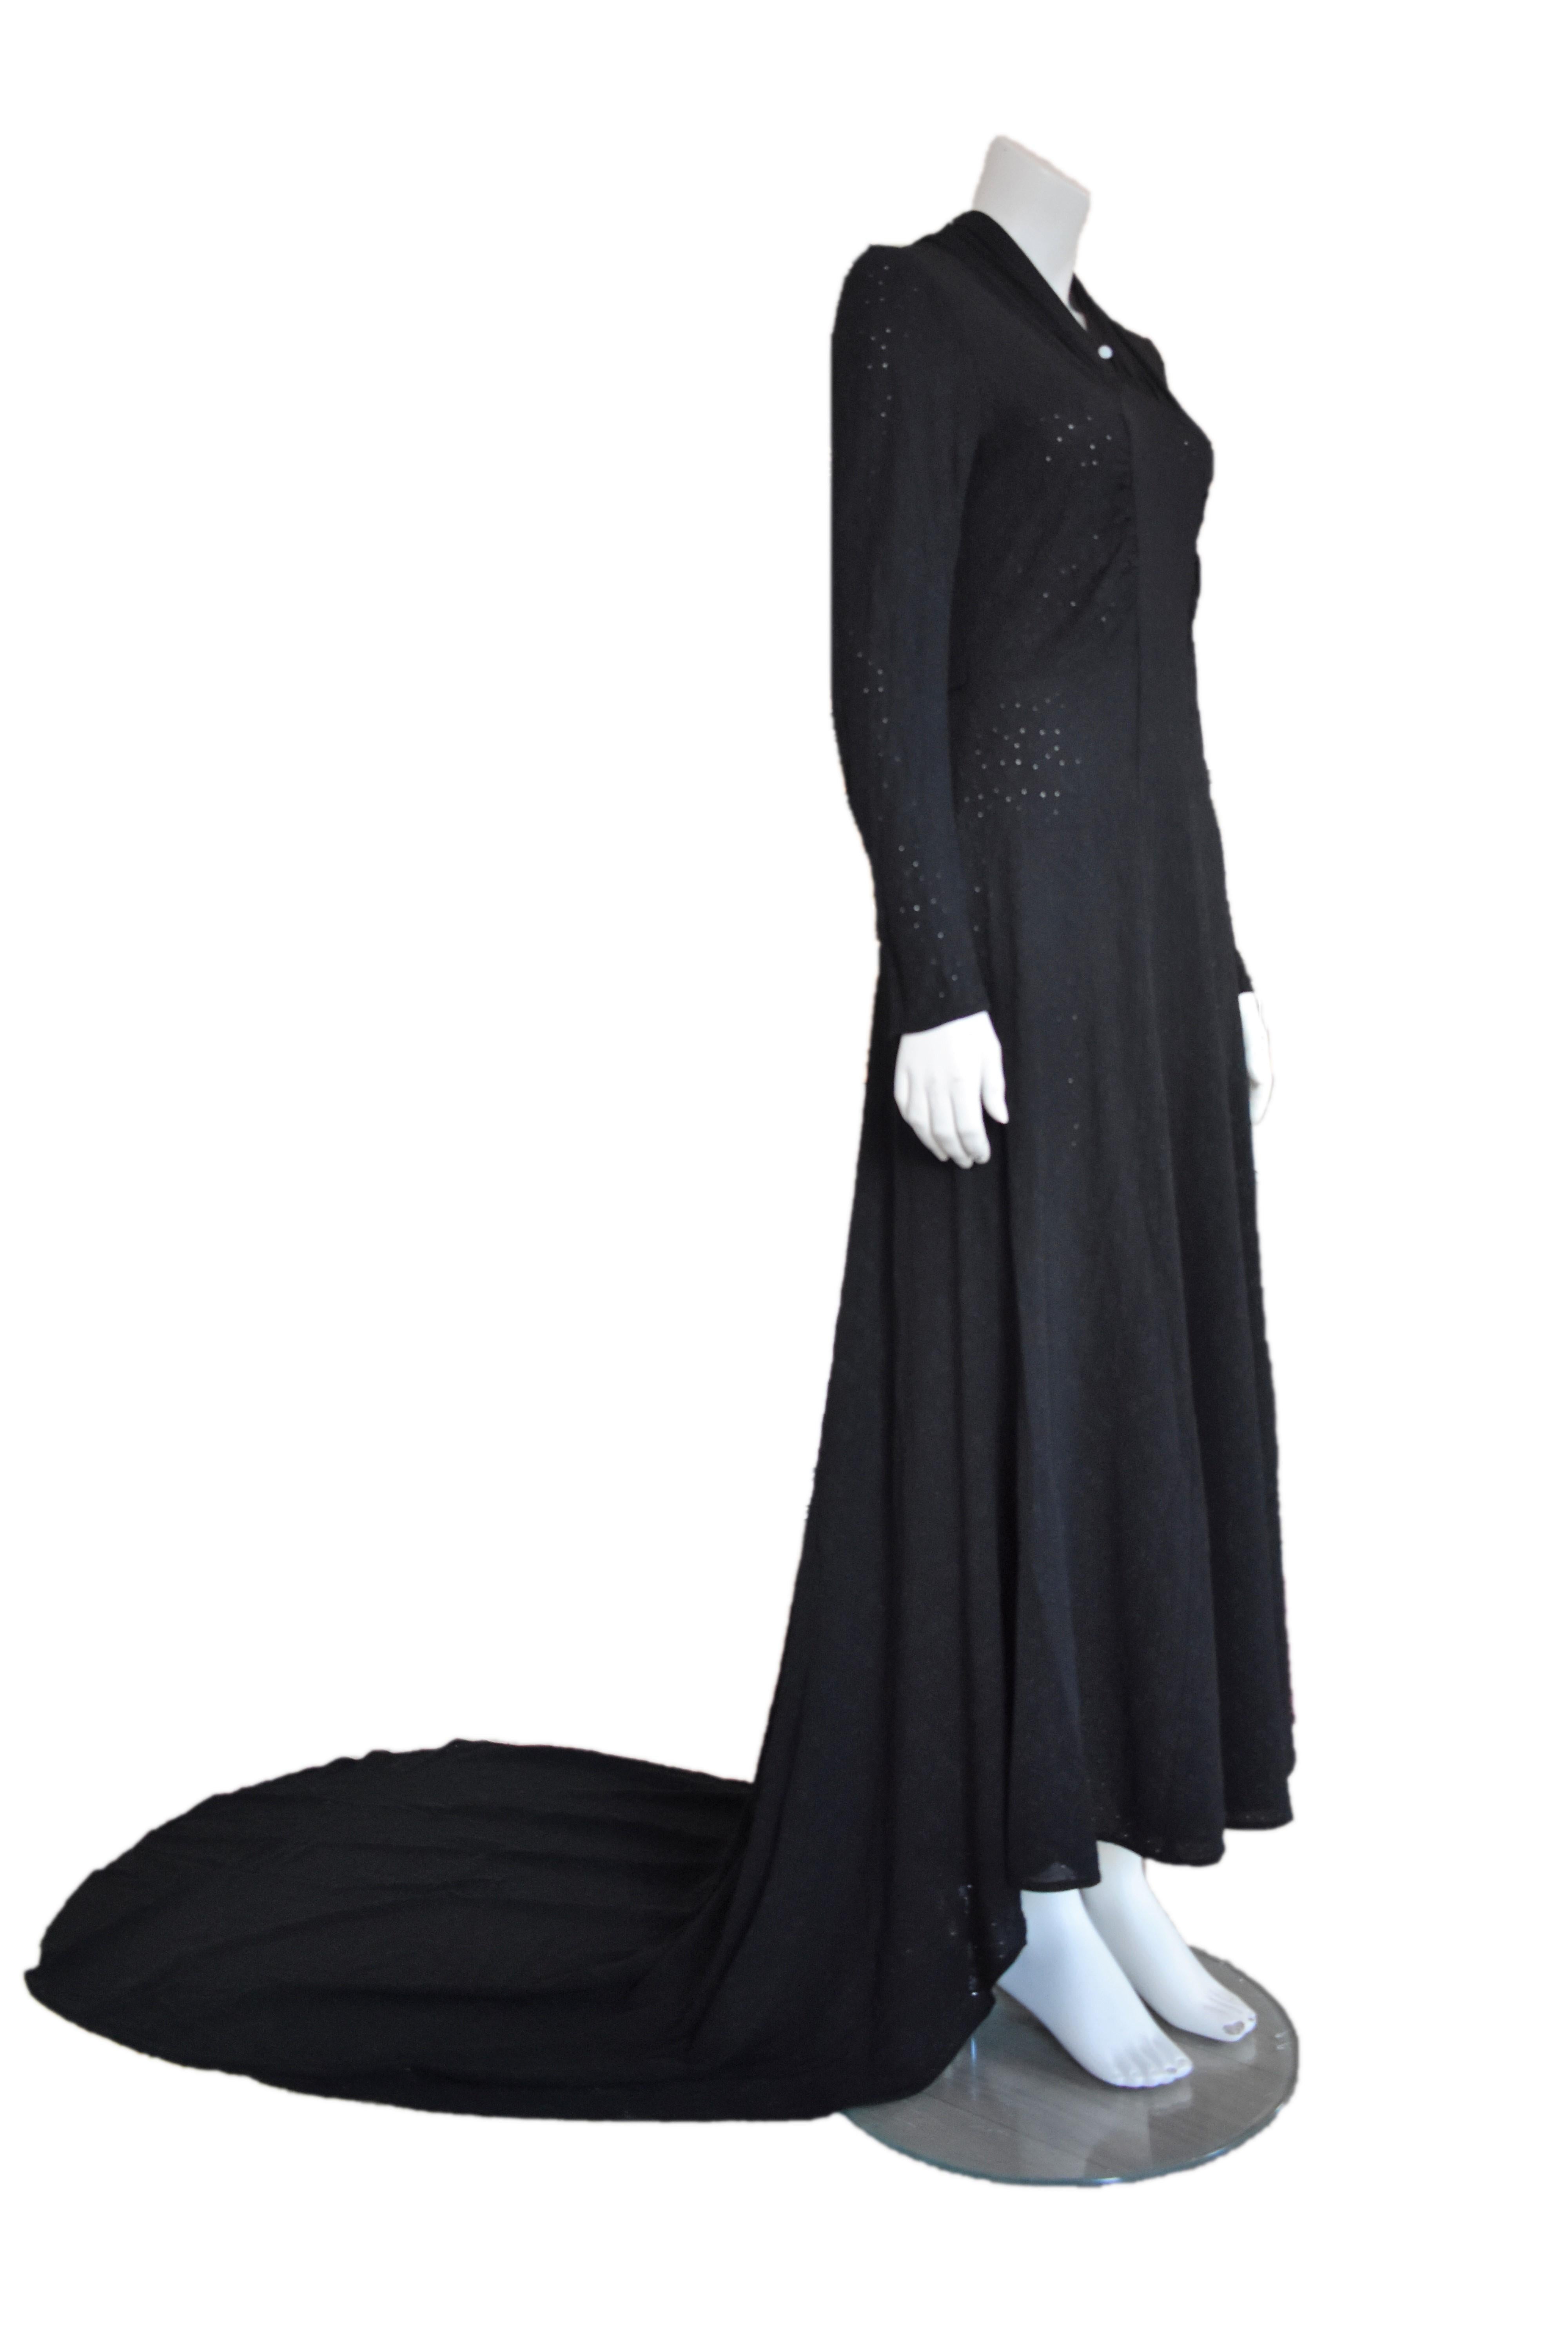 FINAL SALE Vintage Embroidered Hand-Made 1940's Black Gown with Long Train In Good Condition For Sale In Amsterdam, NL